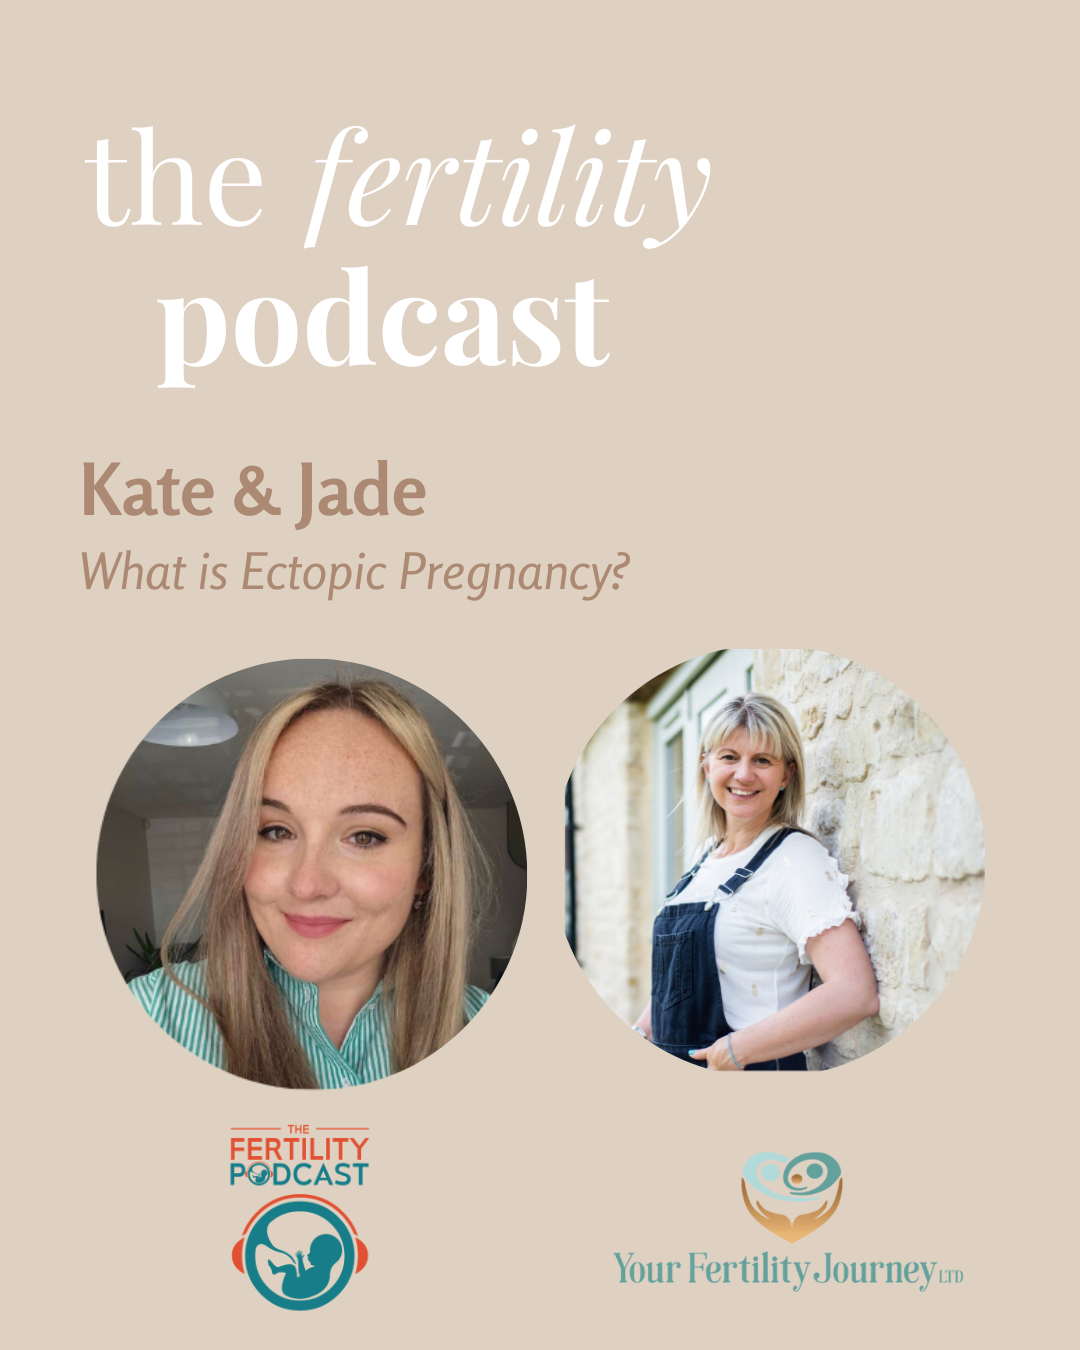 Jade – What is Ectopic Pregnancy?